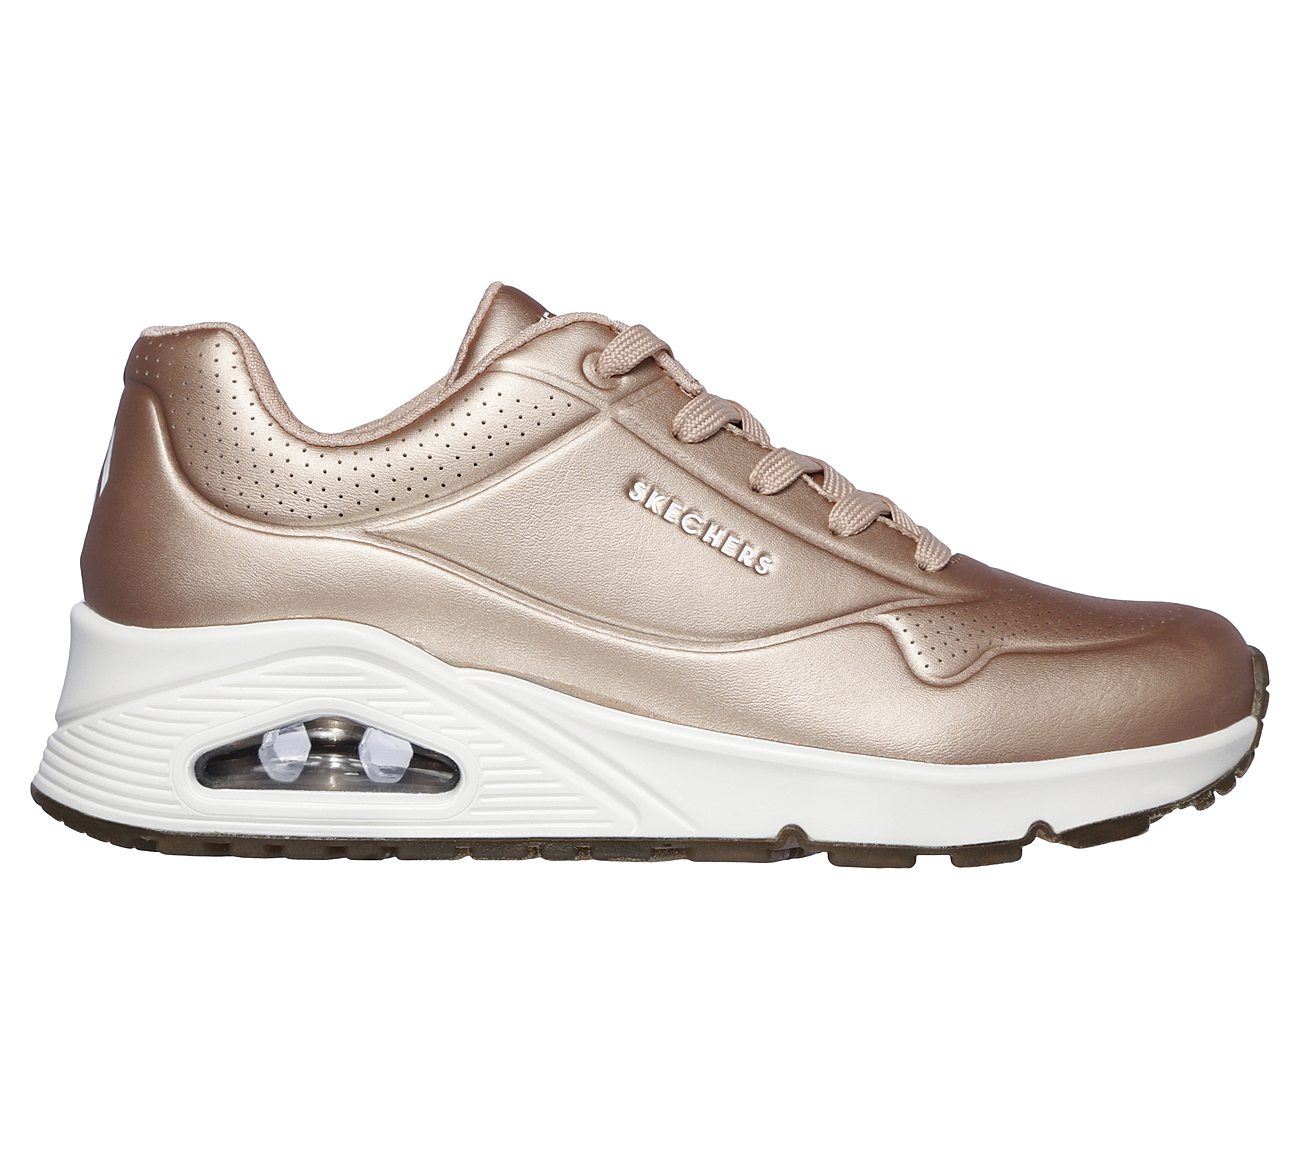 skechers shoes rose gold